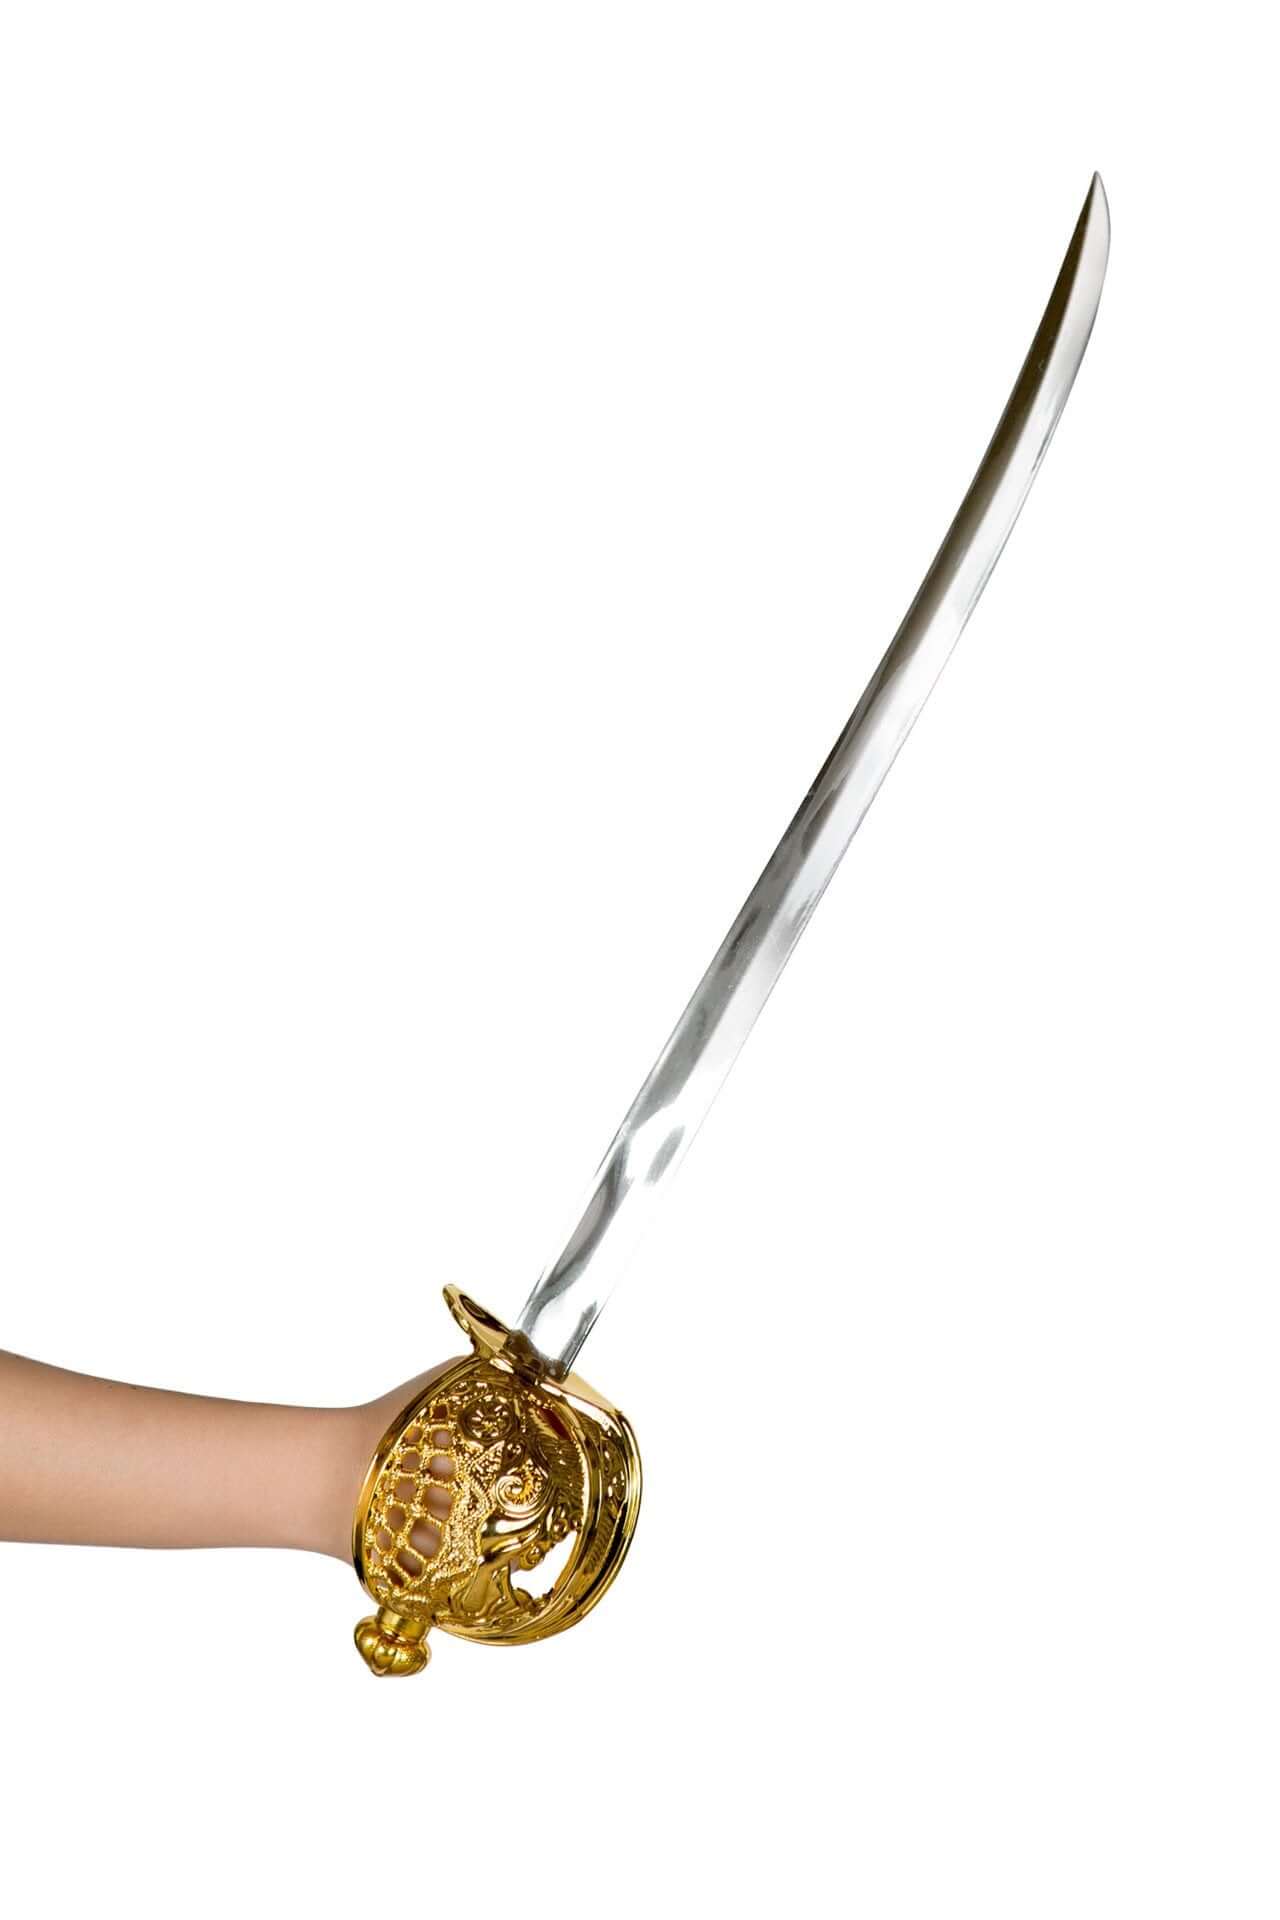 25” Pirate Sword with Round Handle